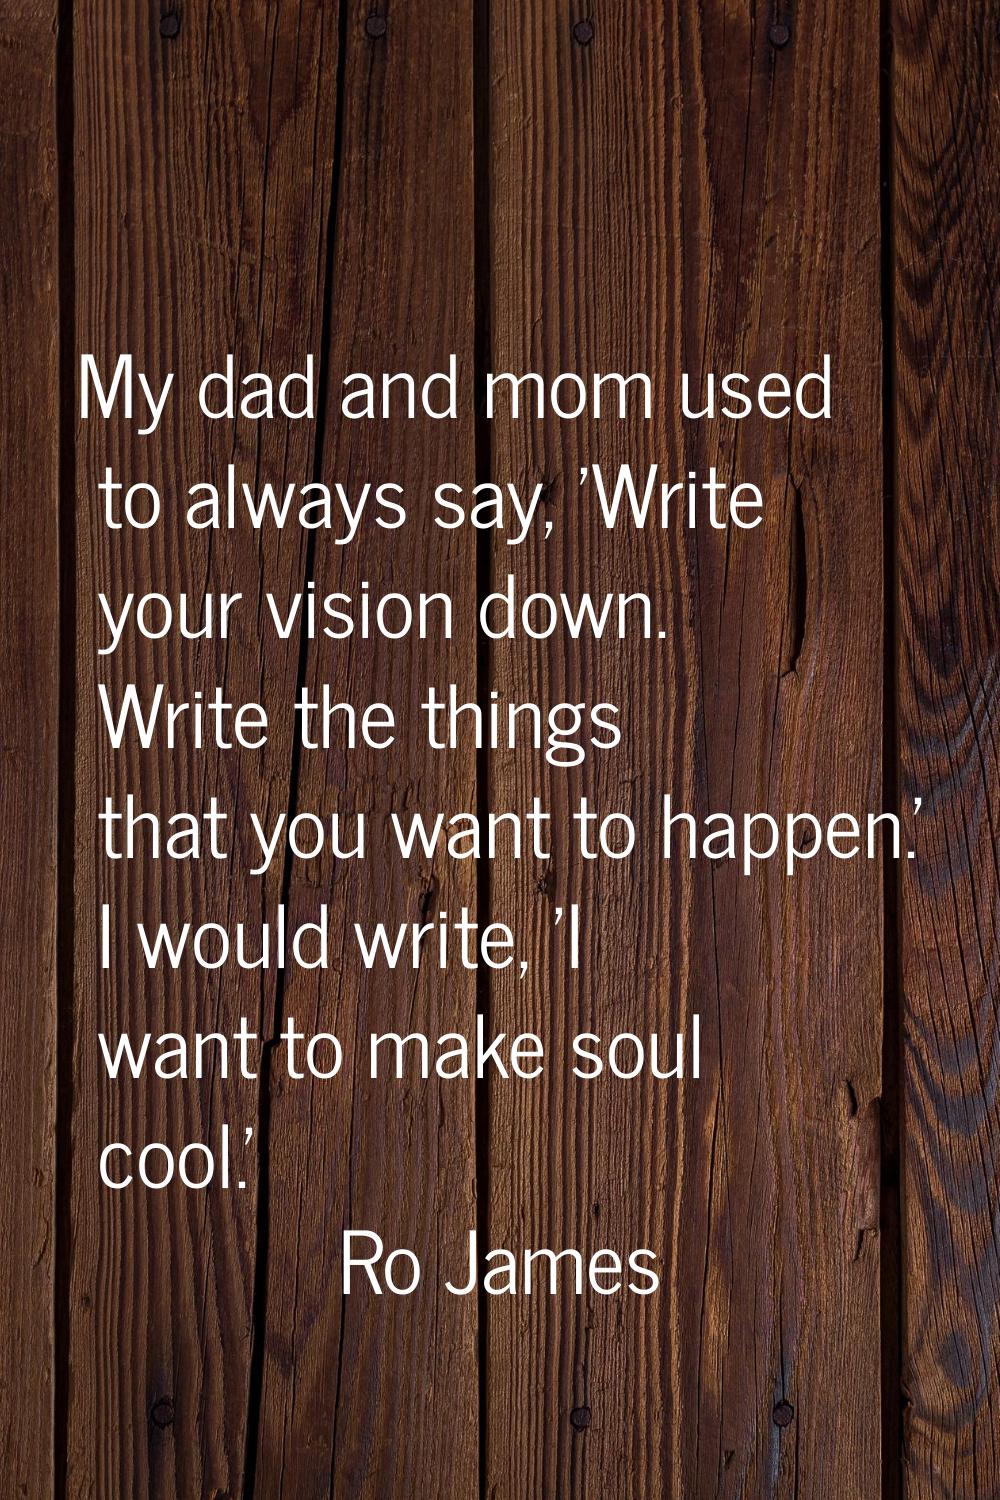 My dad and mom used to always say, 'Write your vision down. Write the things that you want to happe